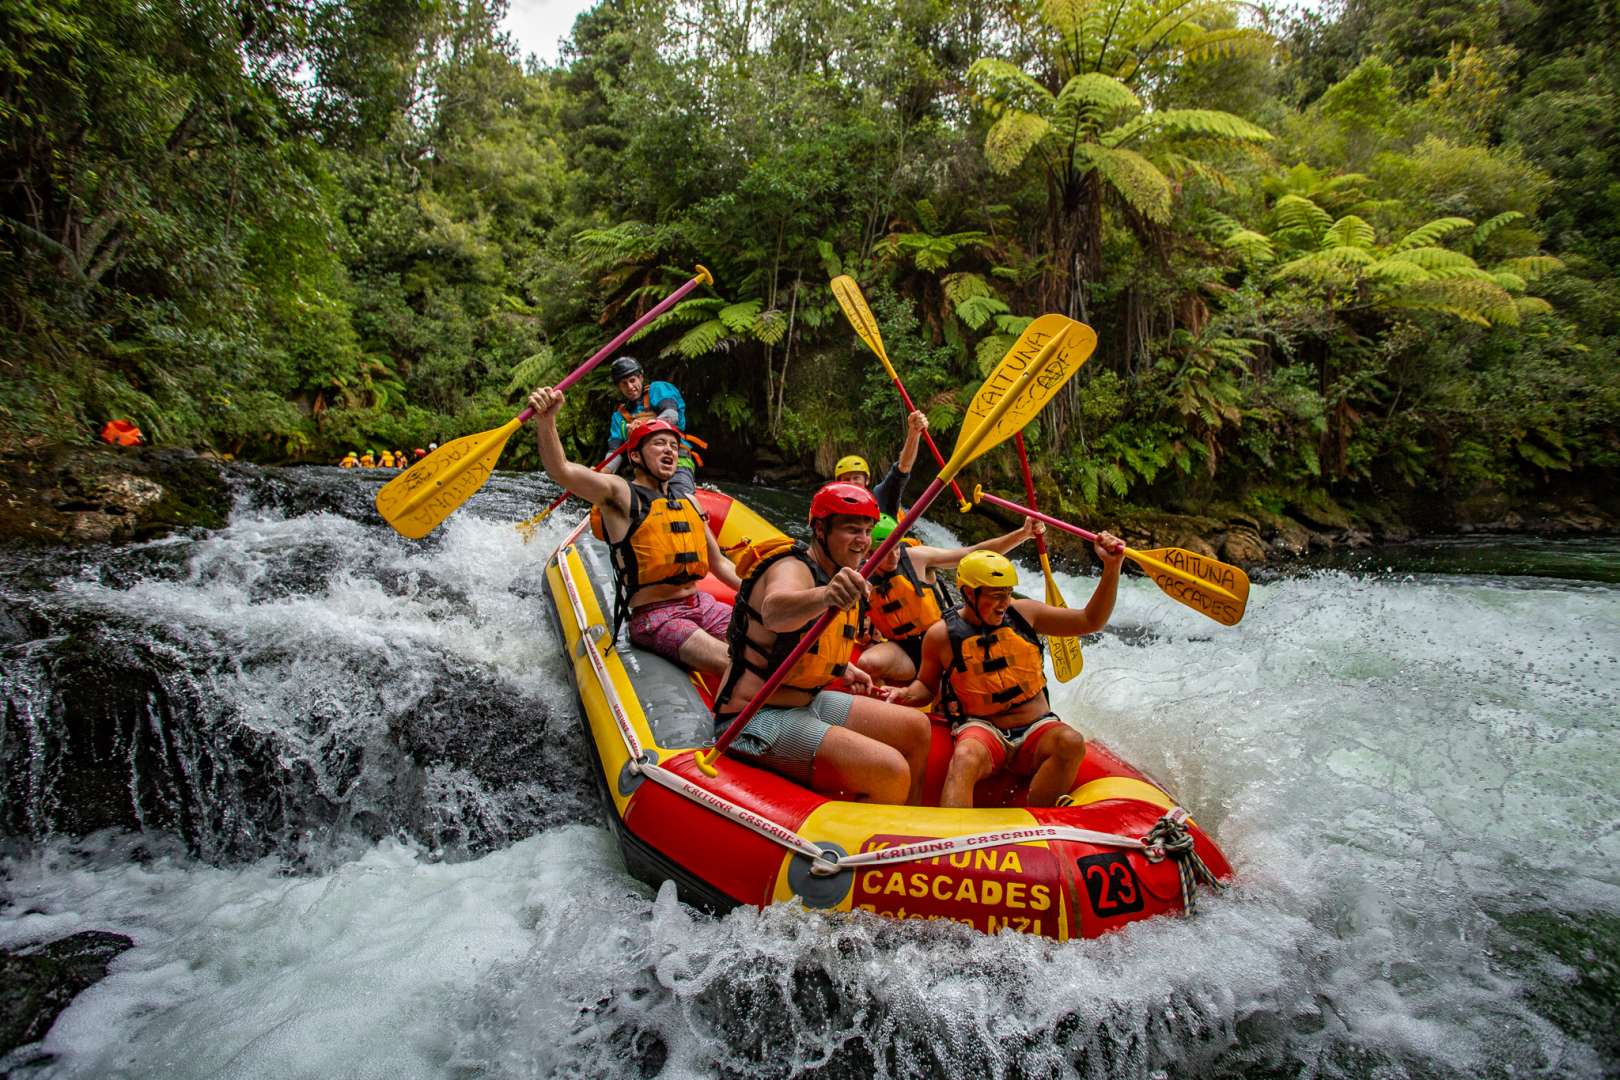 River rafting Epic fun with your mates